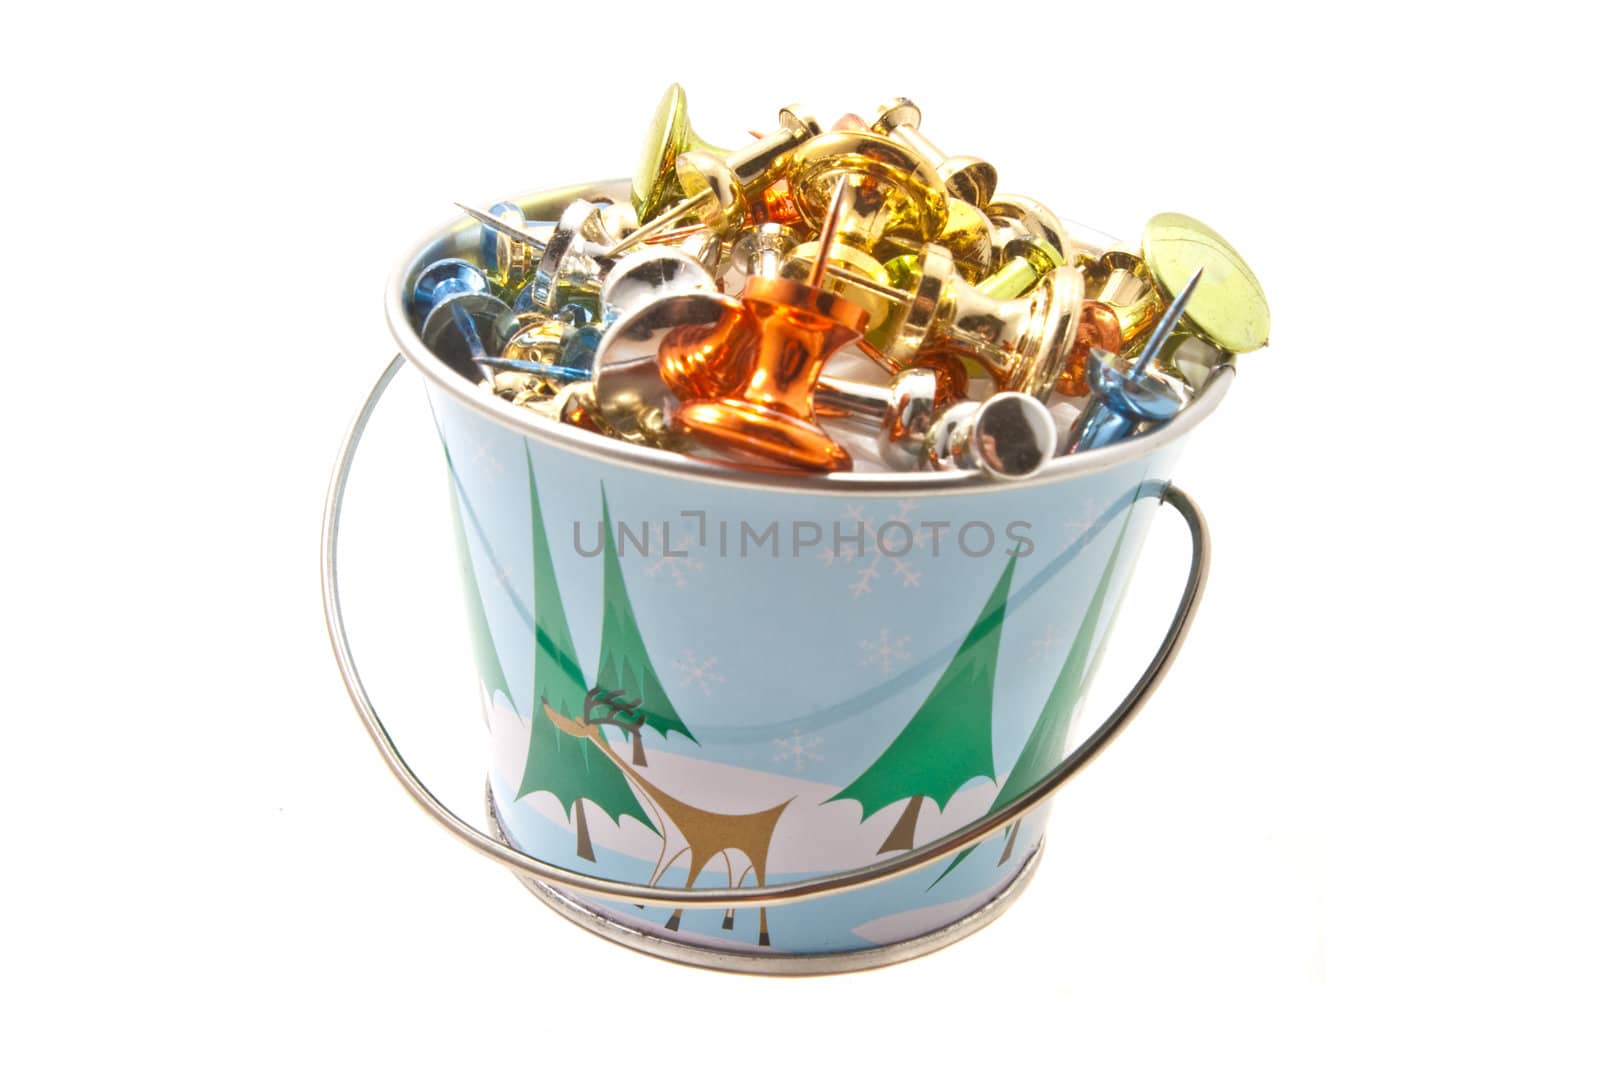 Miniature bucket with Holiday design, filled with brightly colored push pins.  Isolated on a white background.